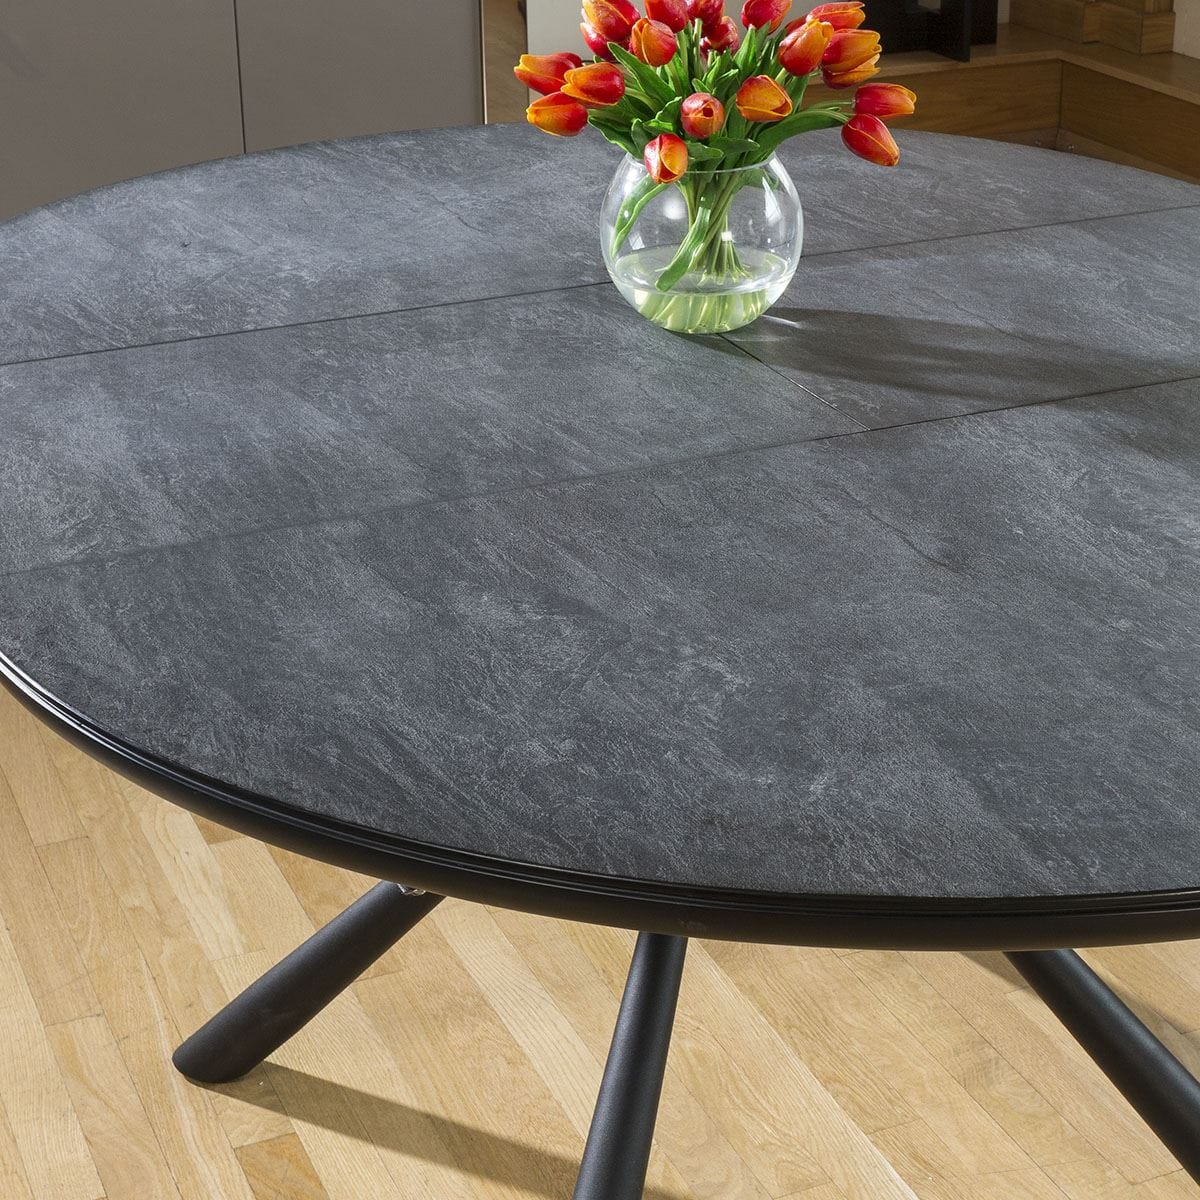 Quatropi Round Slate Effect Melamine Dining Table Extends +6 Grey Fabric Chairs